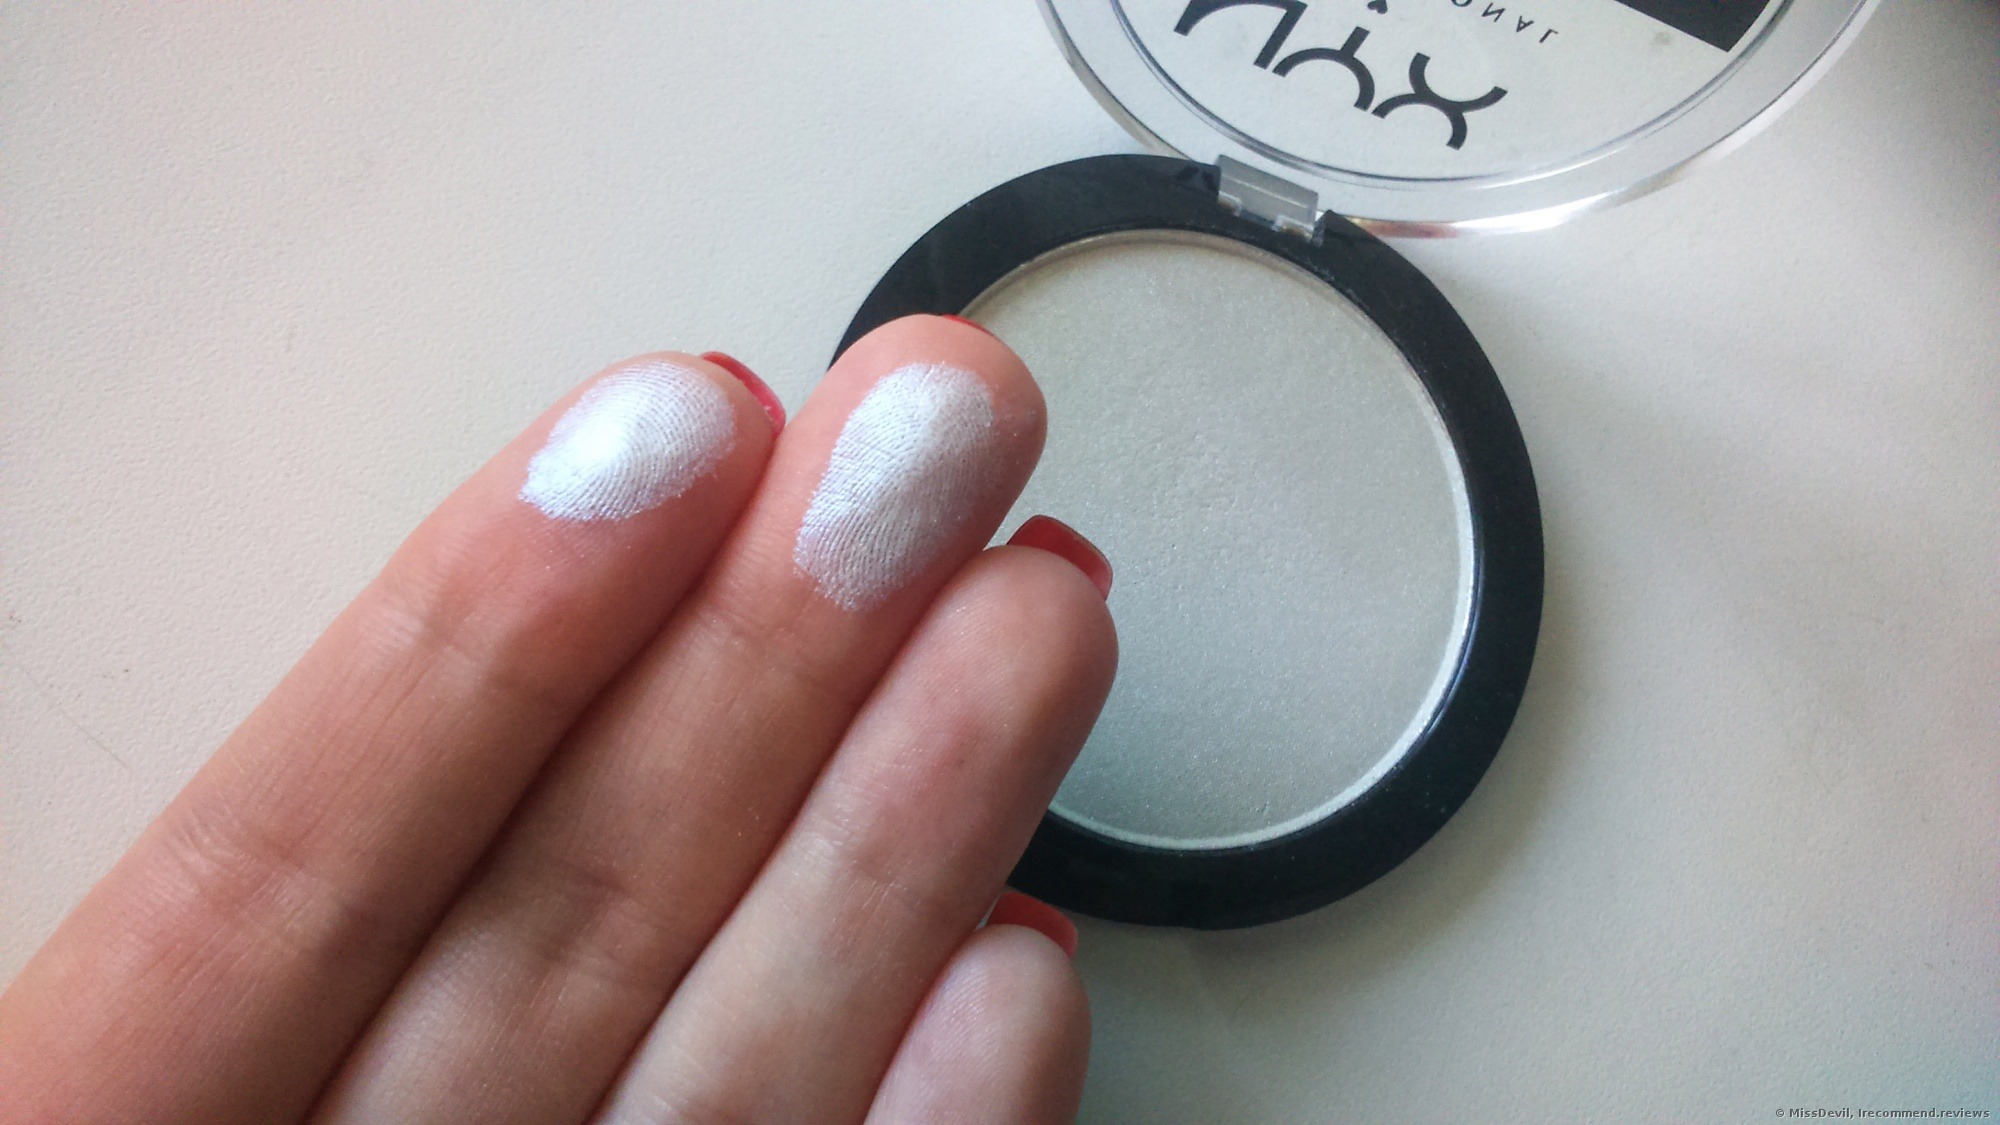 klima Mig selv Tryk ned NYX Duo Chromatic Illuminating Powder Highlighter - «Miss winter colors?  Wanna try something new? I've found the perfect product that gives a winter  ice glow to my skin! NYX Duo Chromatic Illuminating